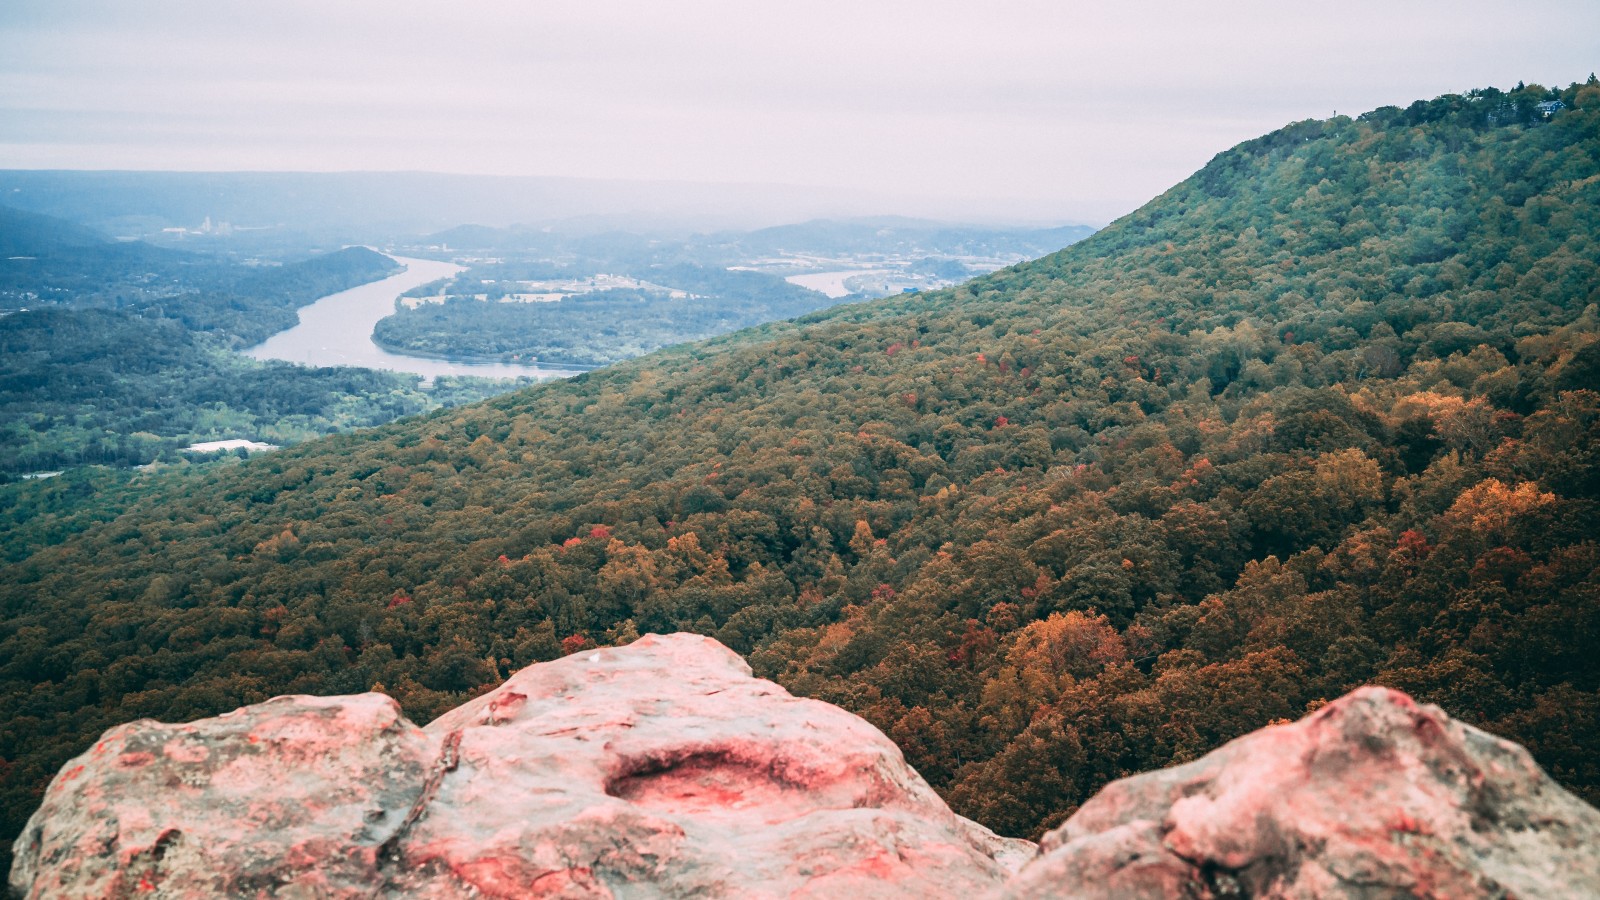 View from the top of a mountain in Chattanooga, Tennessee overlooking a river and hills dotted with green trees